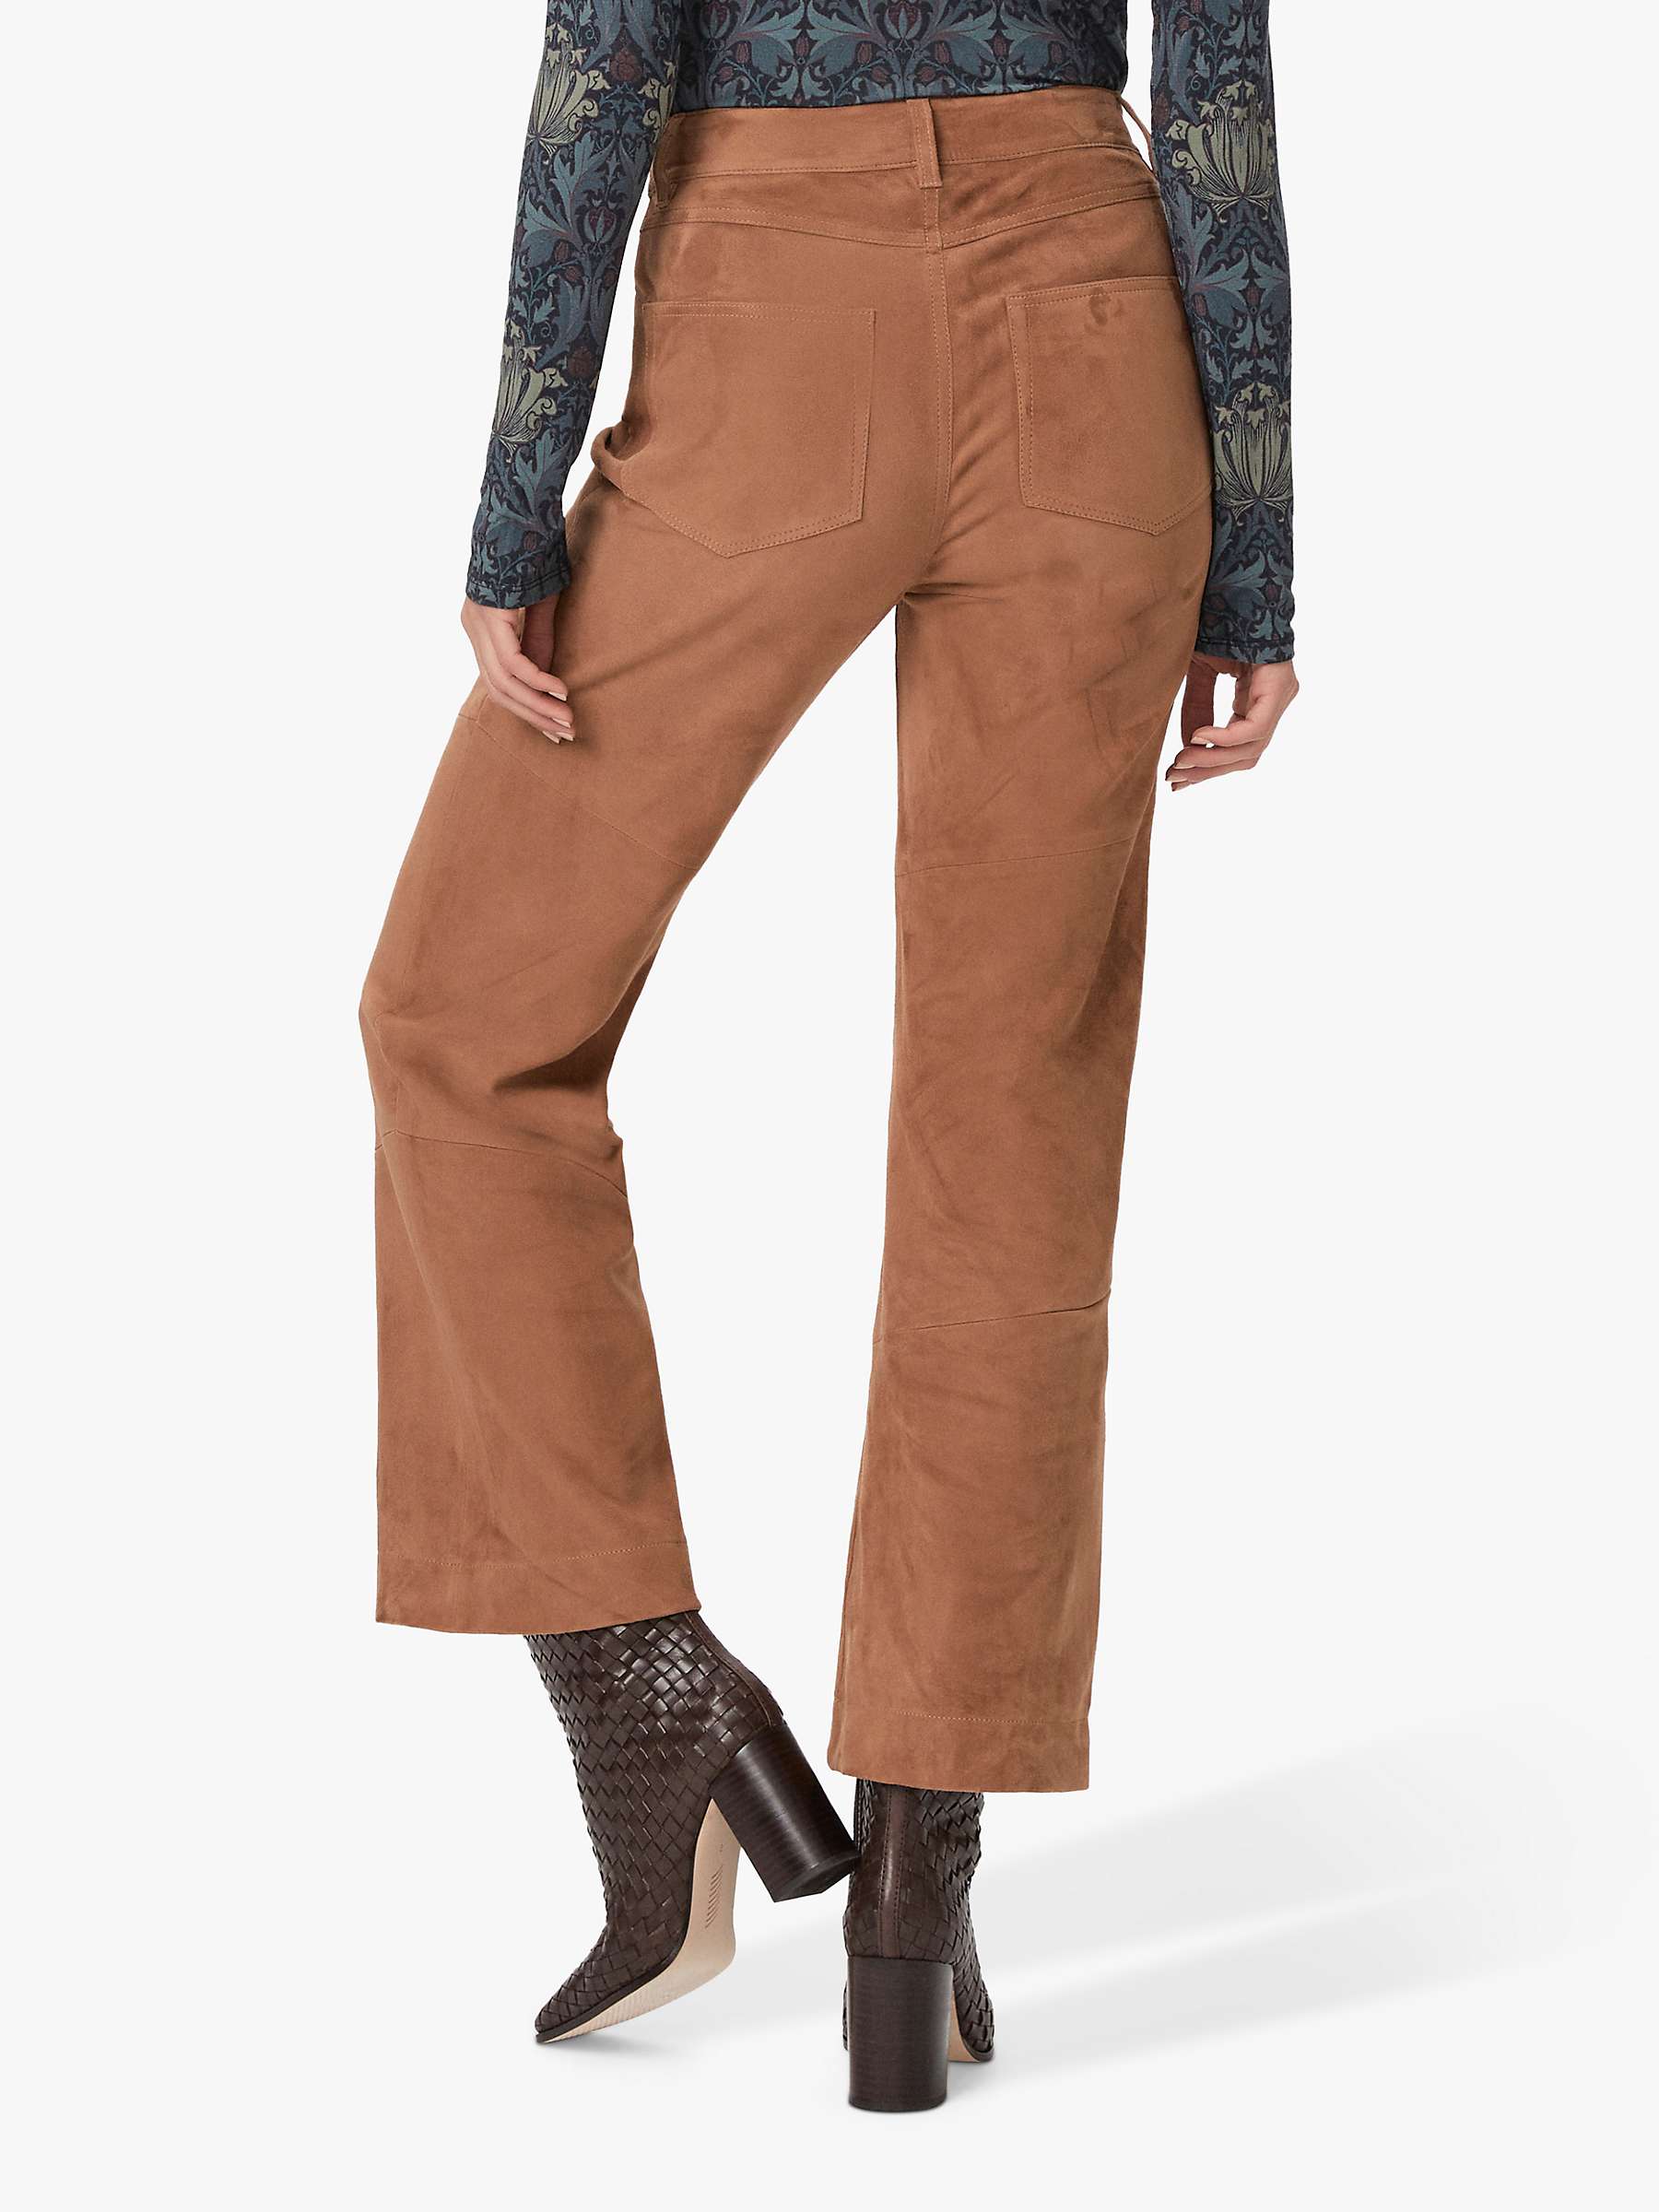 Buy PAIGE Suede Pocket Ankle Trousers, Toffee Bronze Online at johnlewis.com